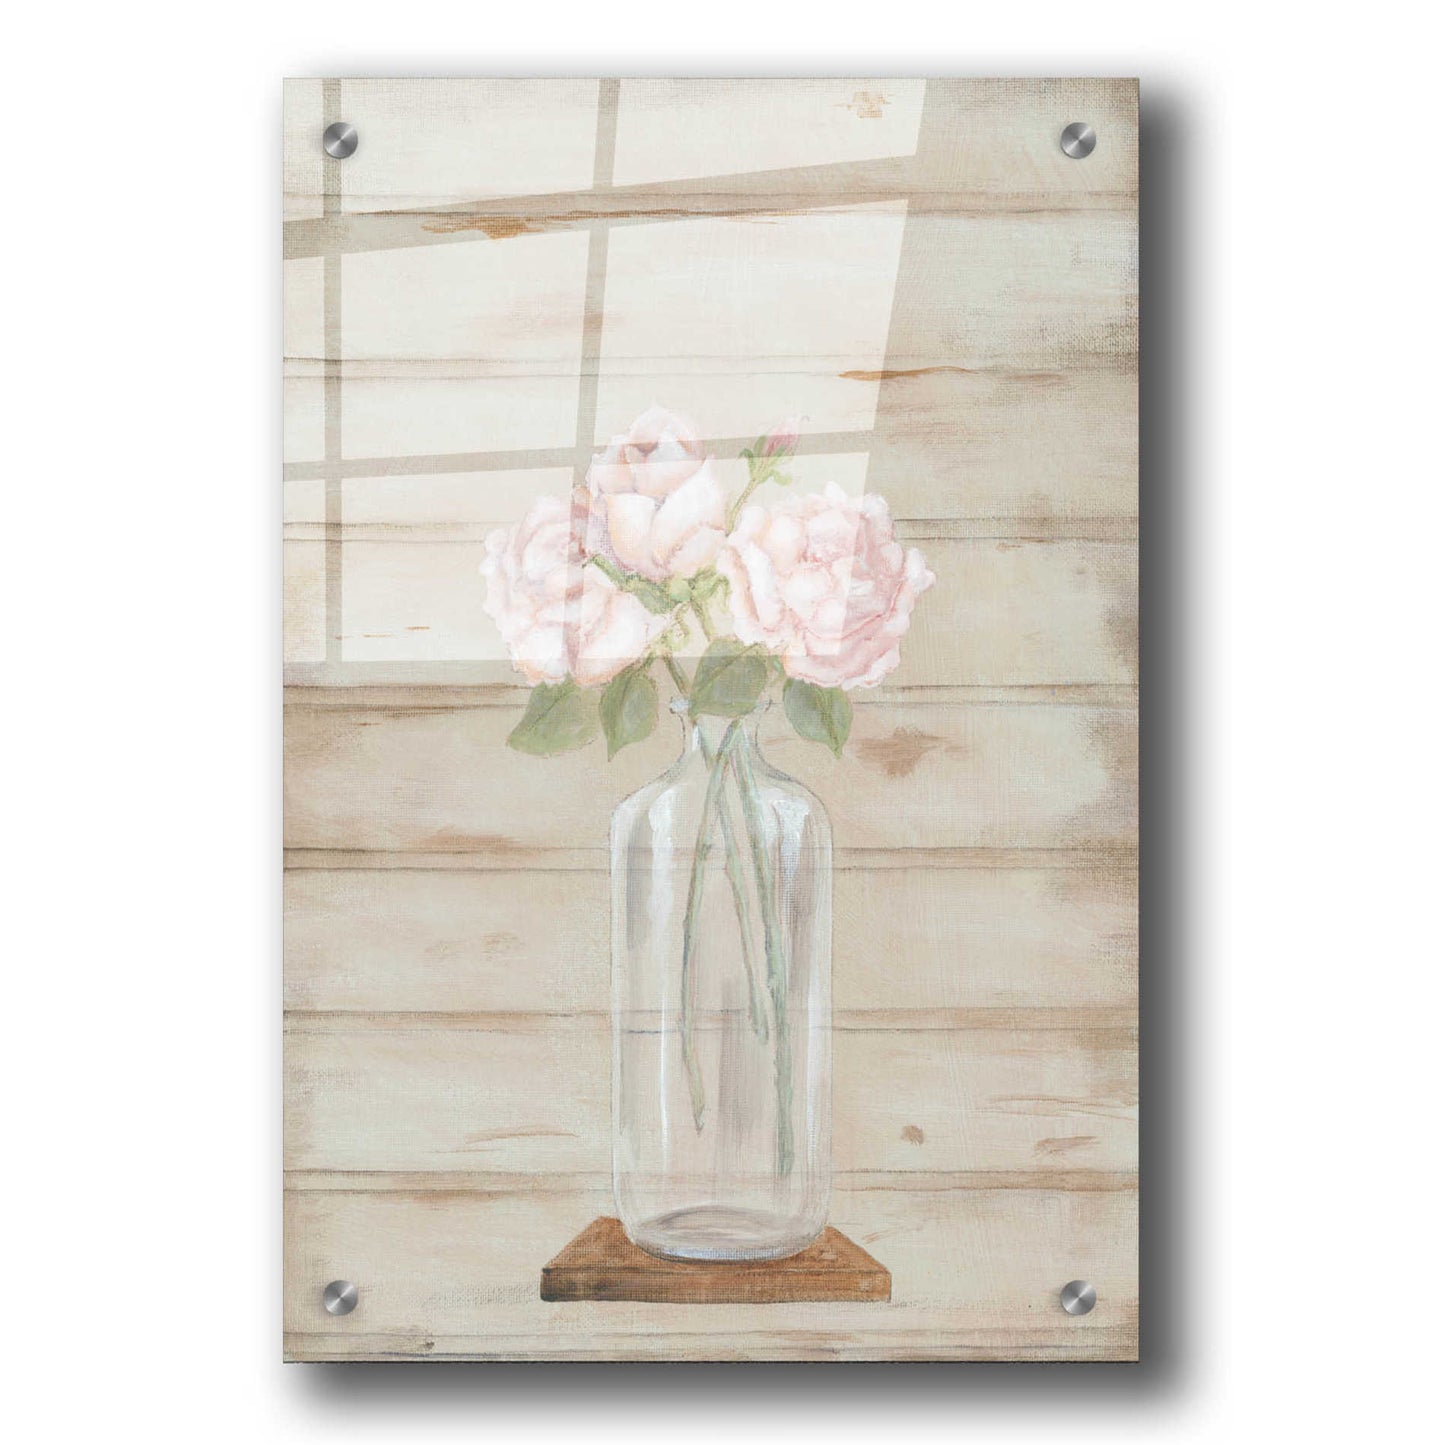 Epic Art 'Roses in Glass Vase' by Pam Britton, Acrylic Glass Wall Art,24x36